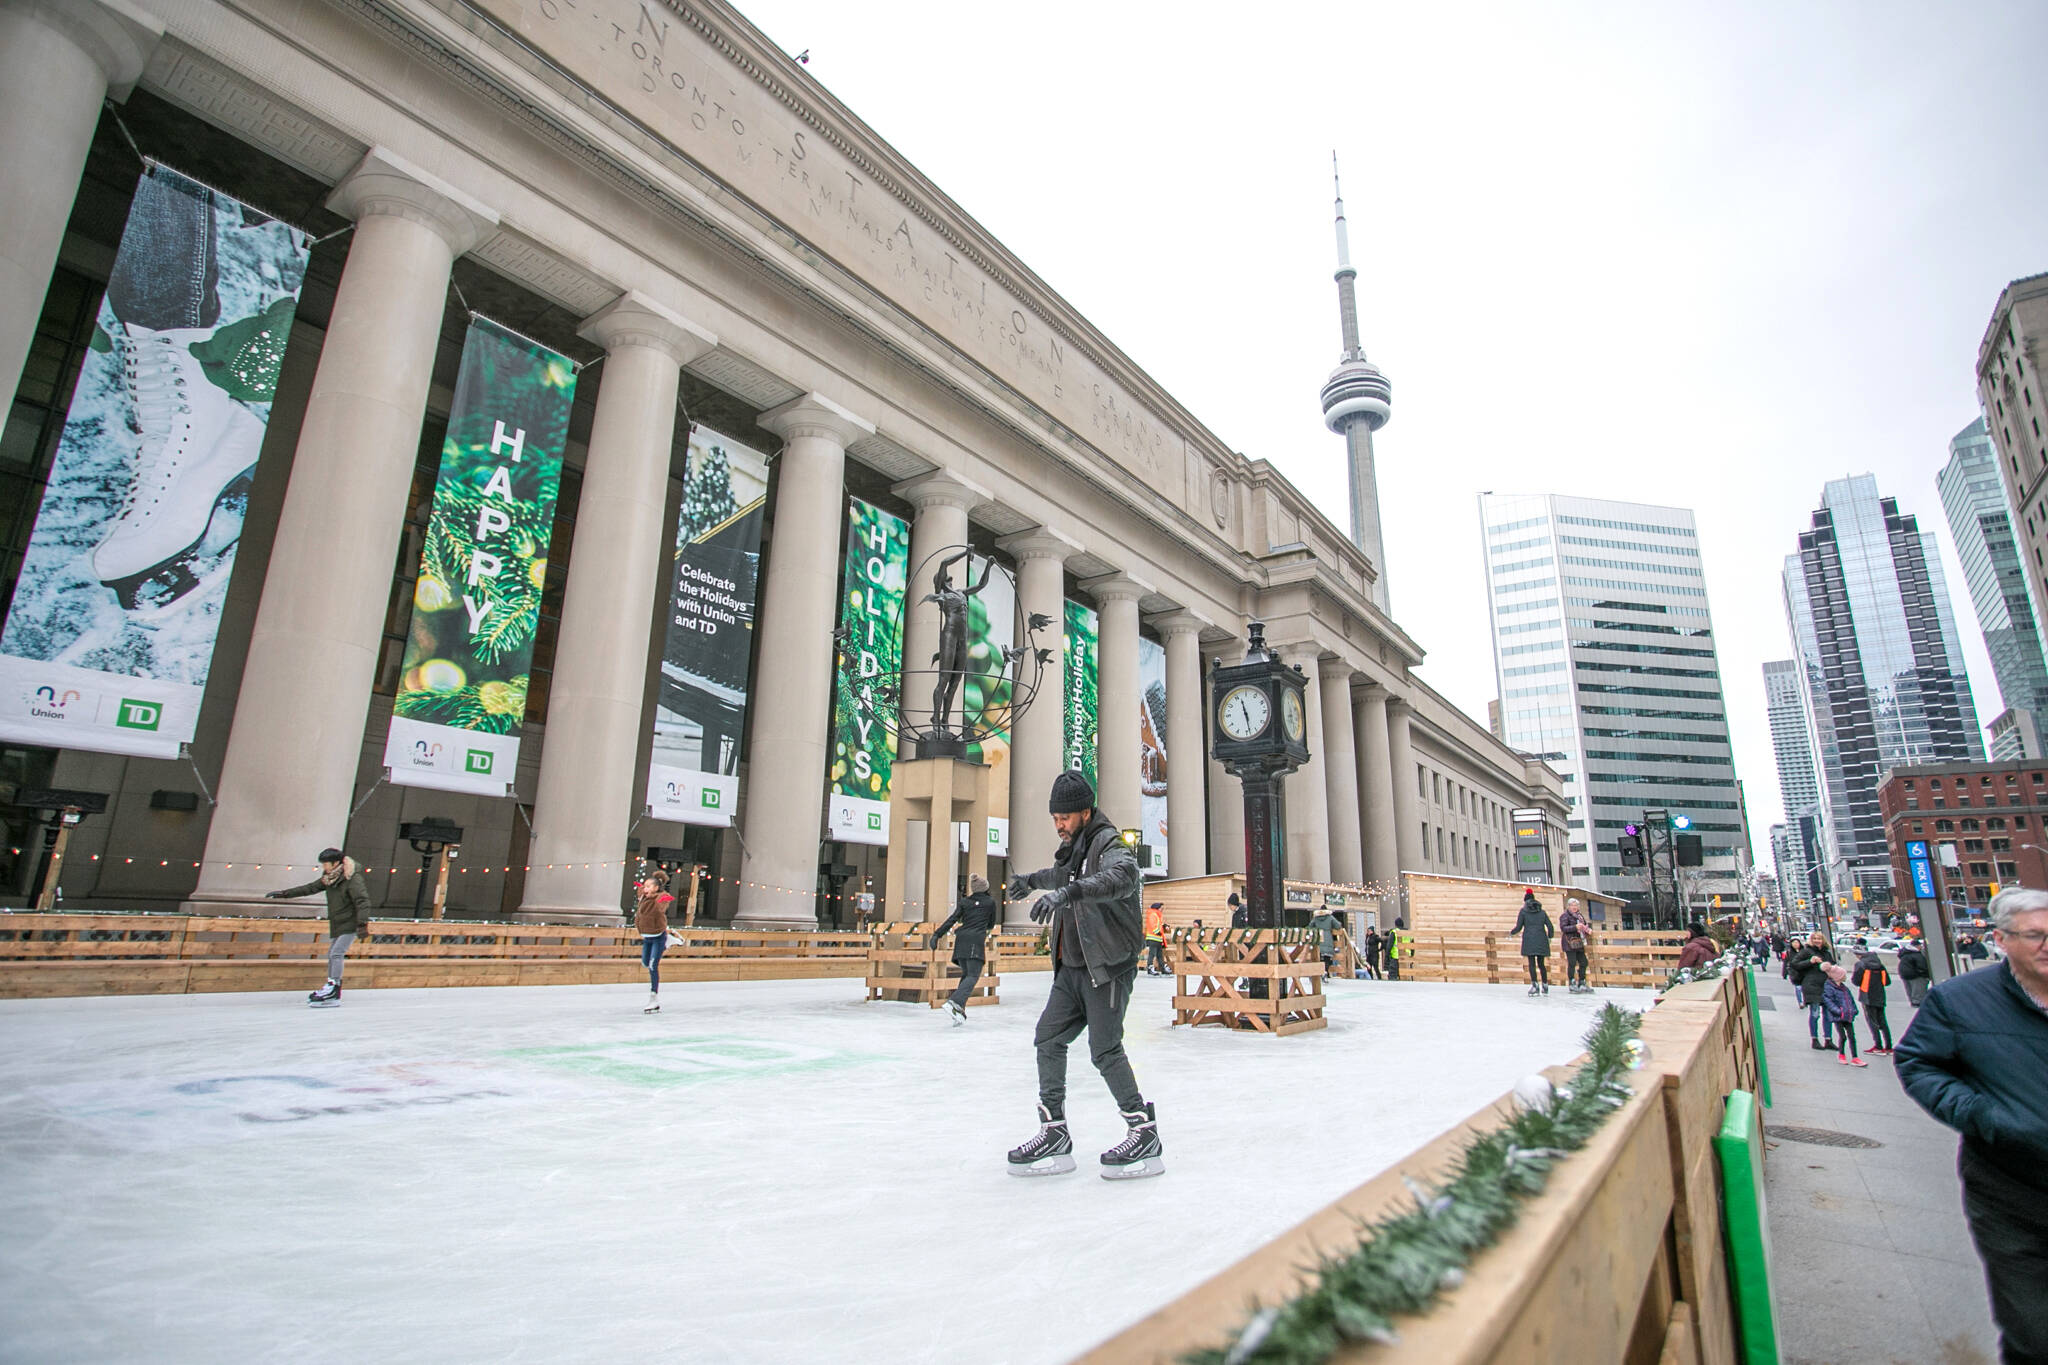 Toronto's newest outdoor skating rink is now officially open at Union